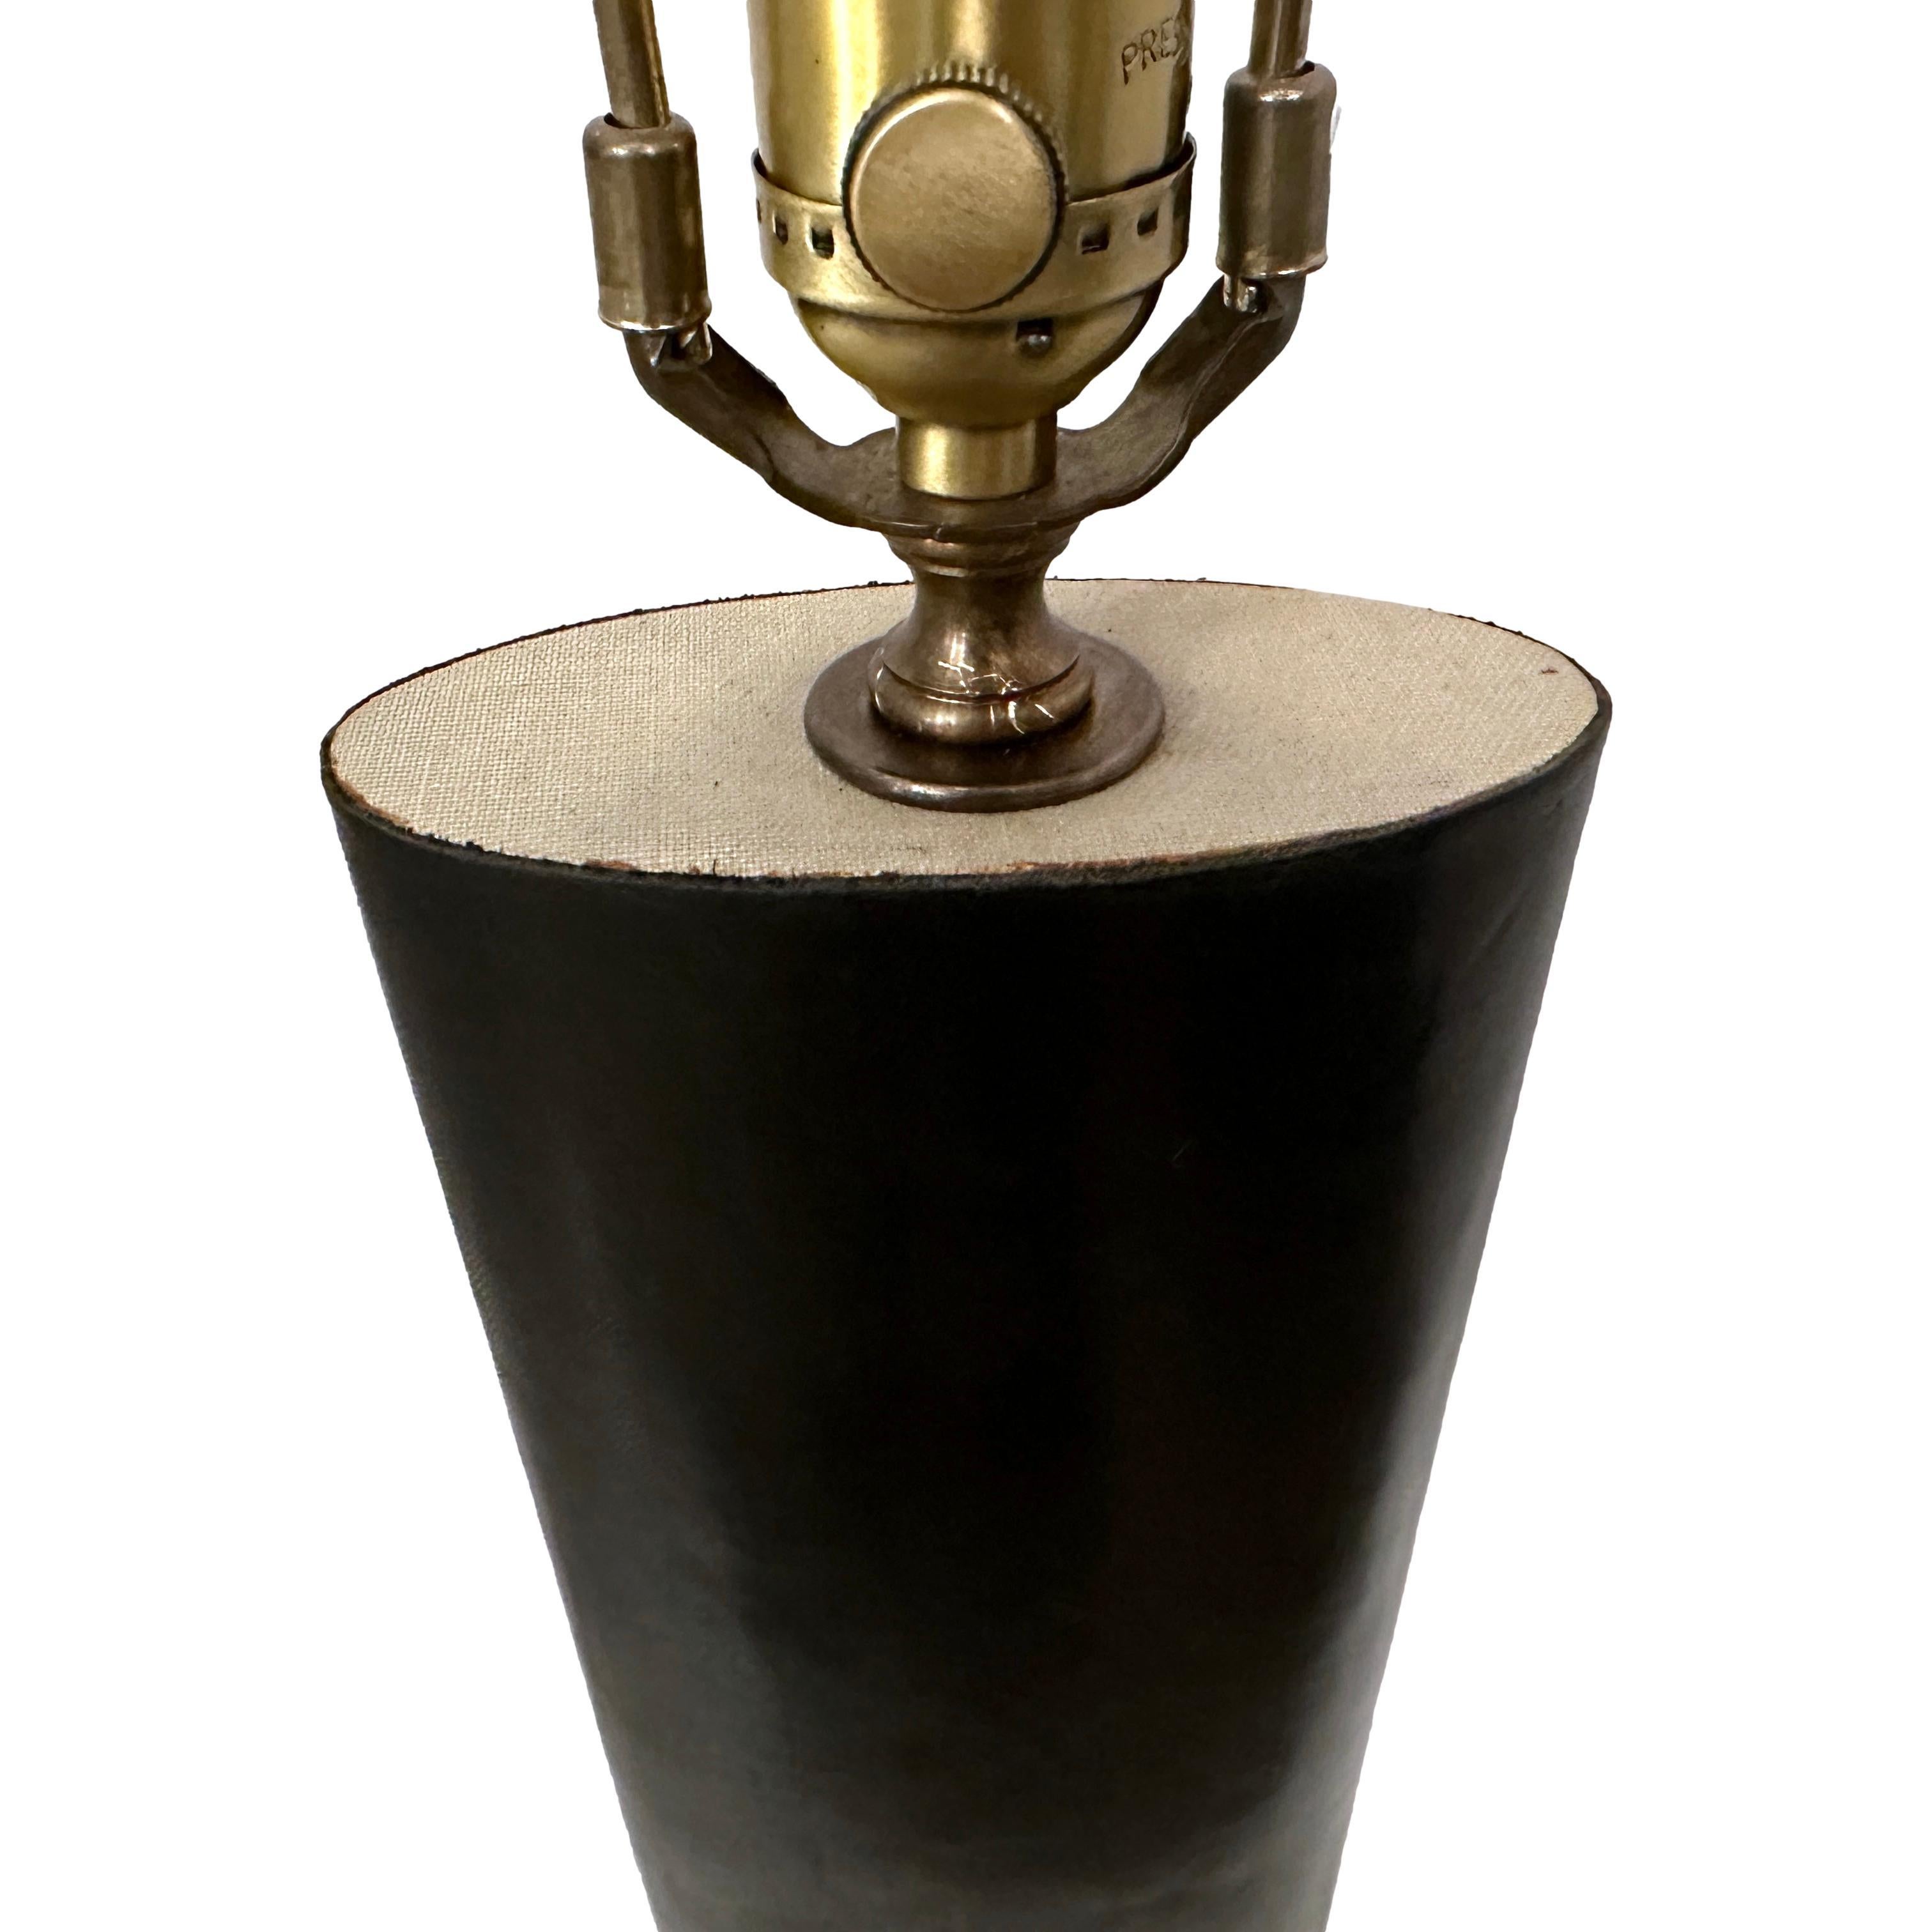 A circa 1950's French black leather table lamp.

Measurements:
Height of body: 19